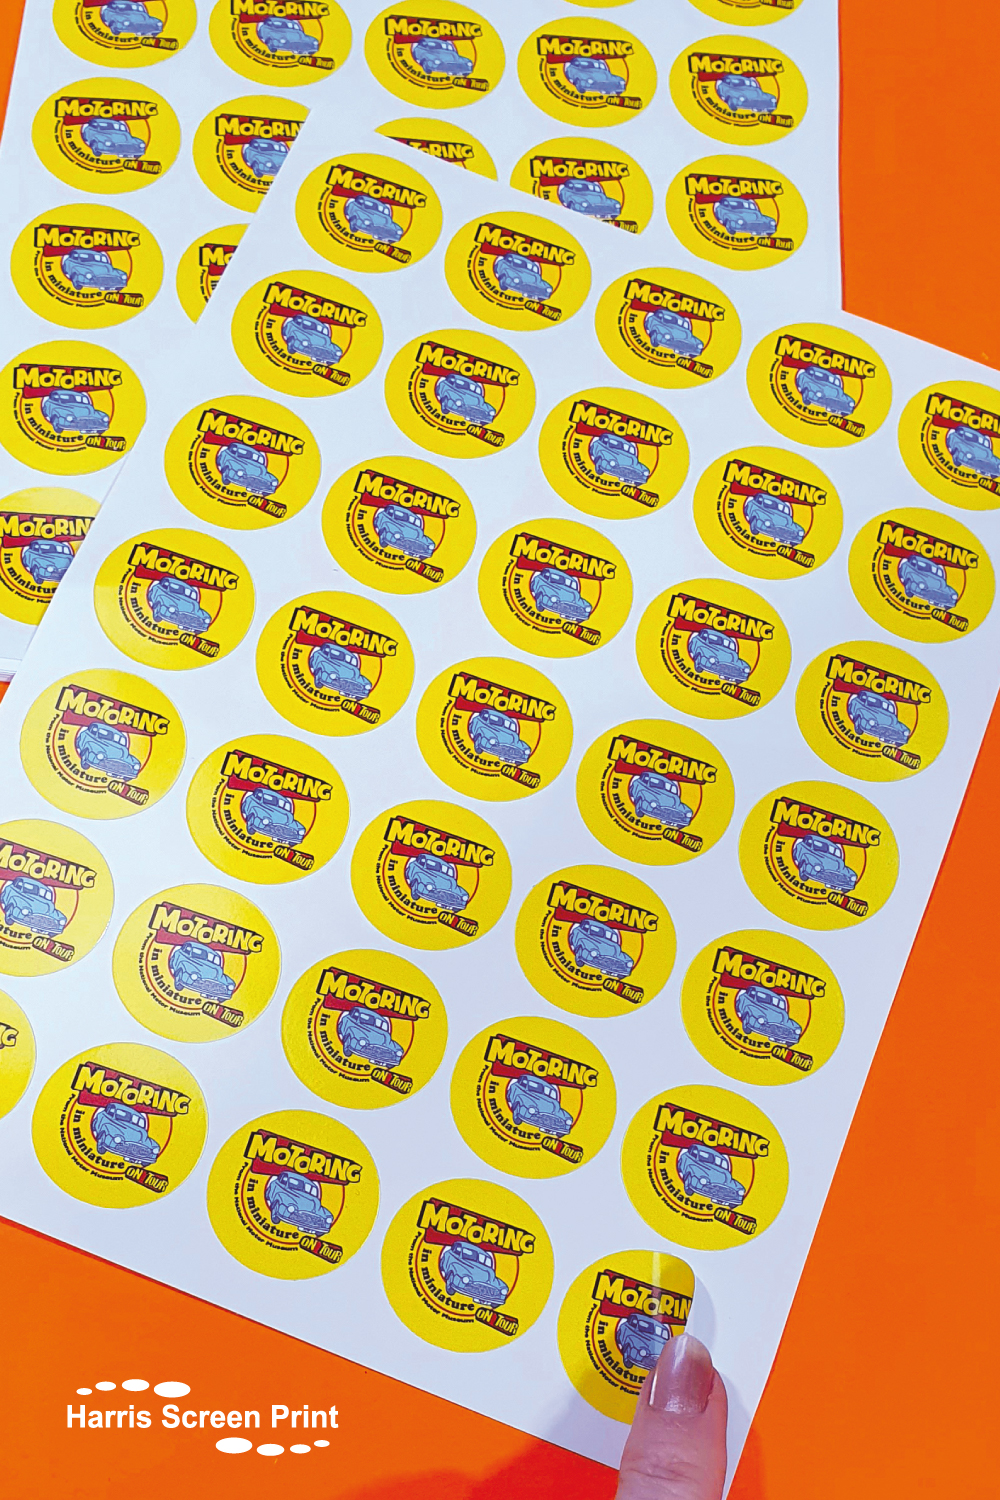 Motoring in Minature round stickers for Beaulieu Motor Museum